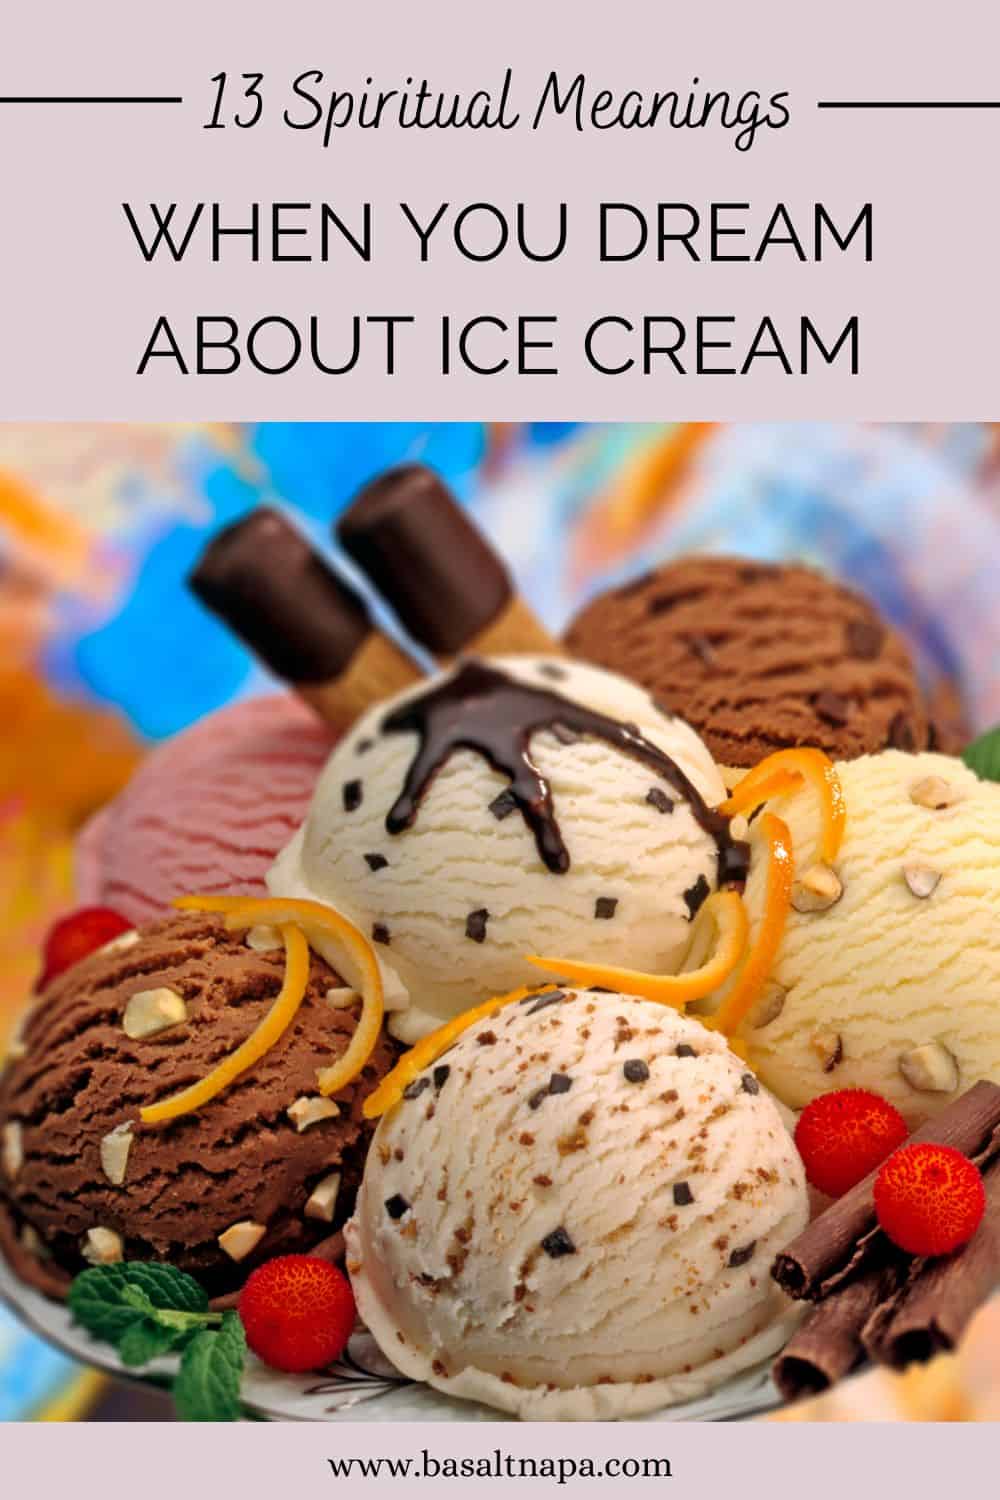 What Does It Mean If You Dream About Ice Cream